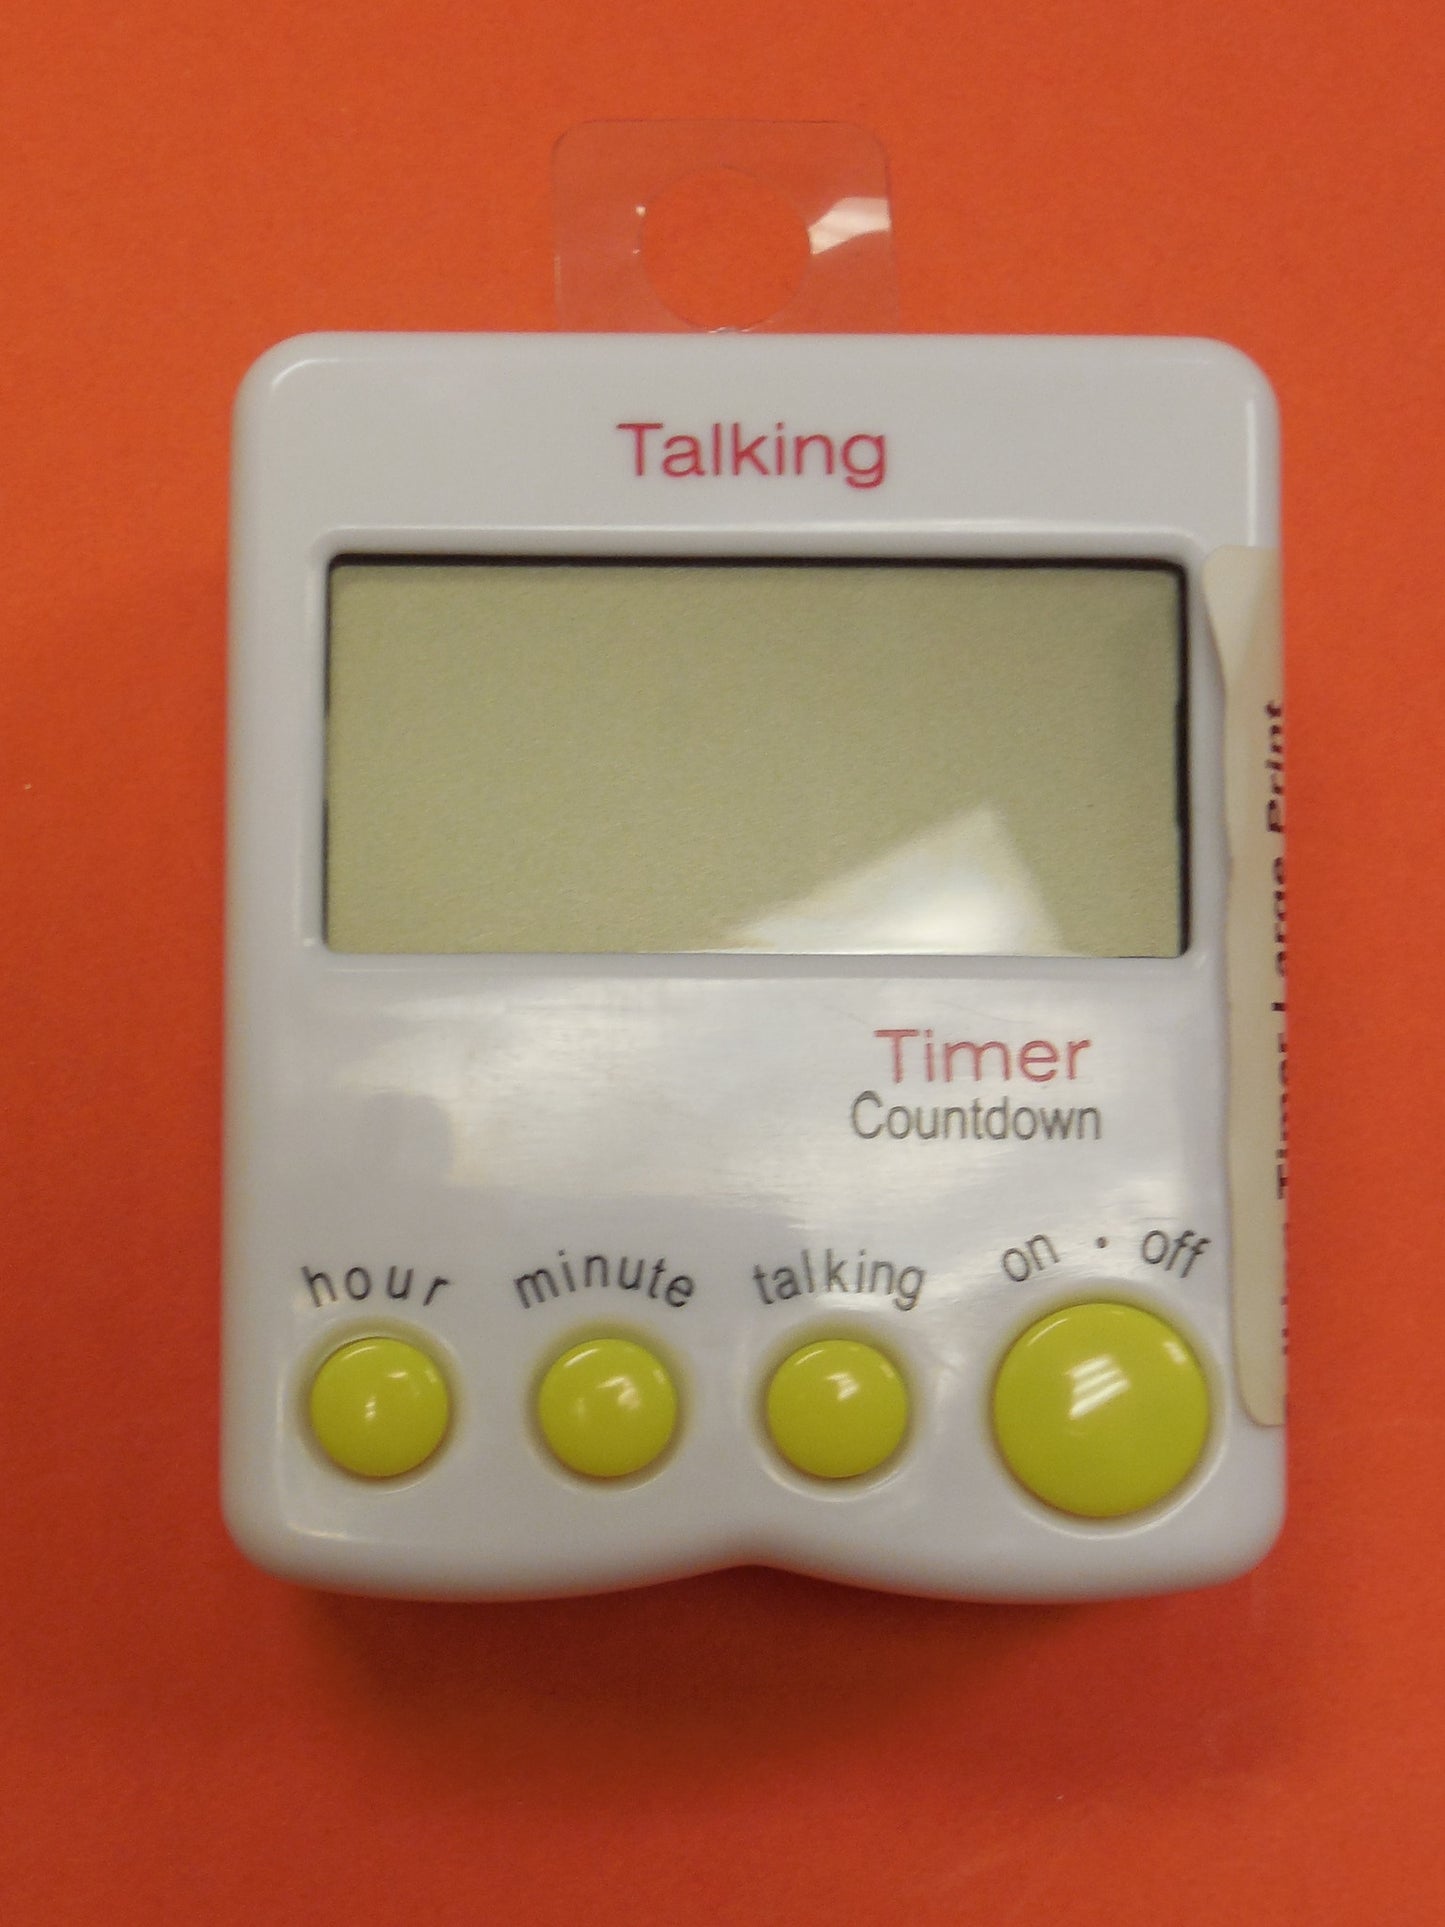 A small white device with 4 yellow buttons a large screen to display the time